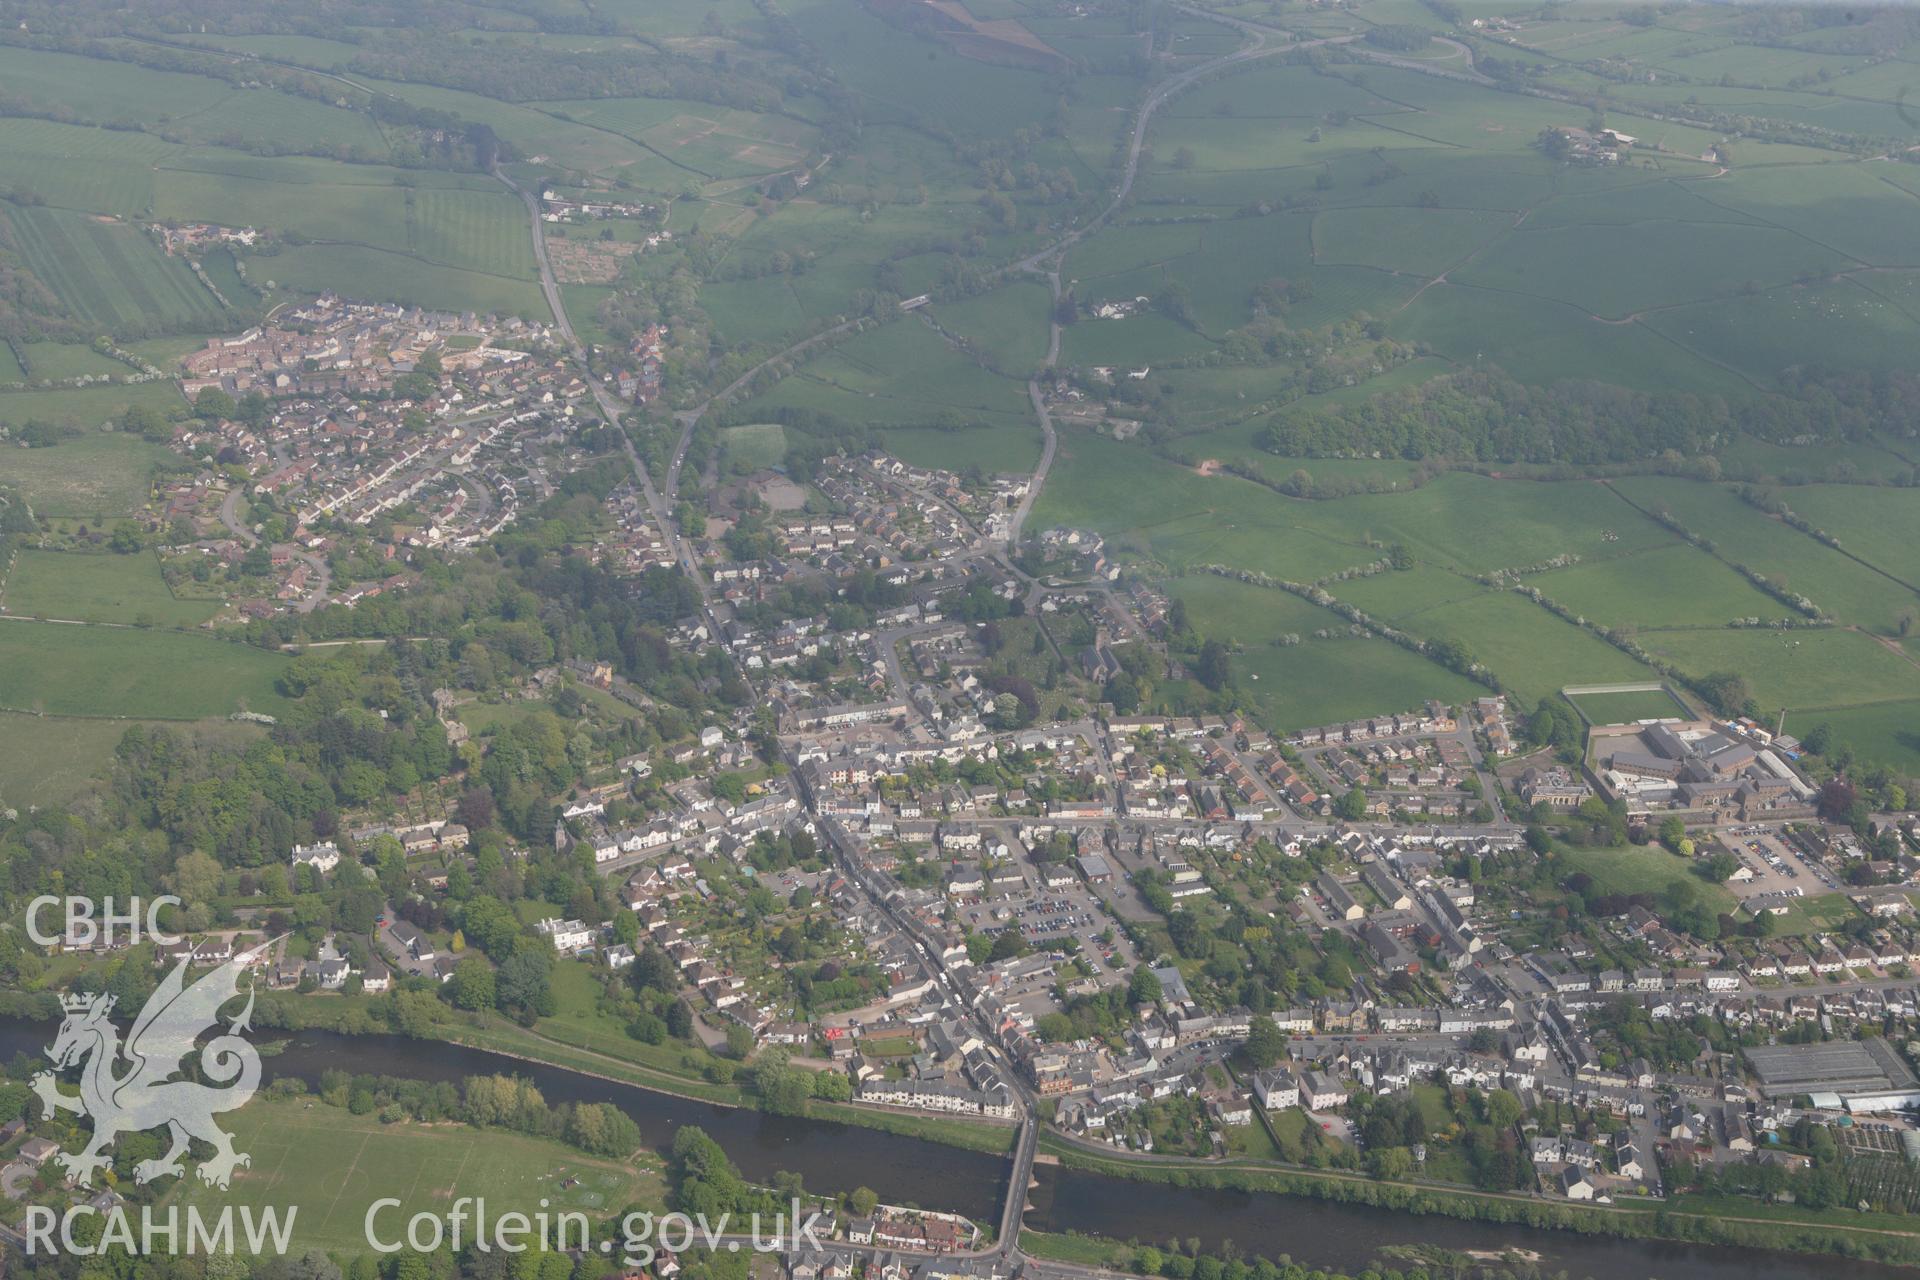 RCAHMW colour oblique photograph of Usk, townscape from west. Taken by Toby Driver on 26/04/2011.